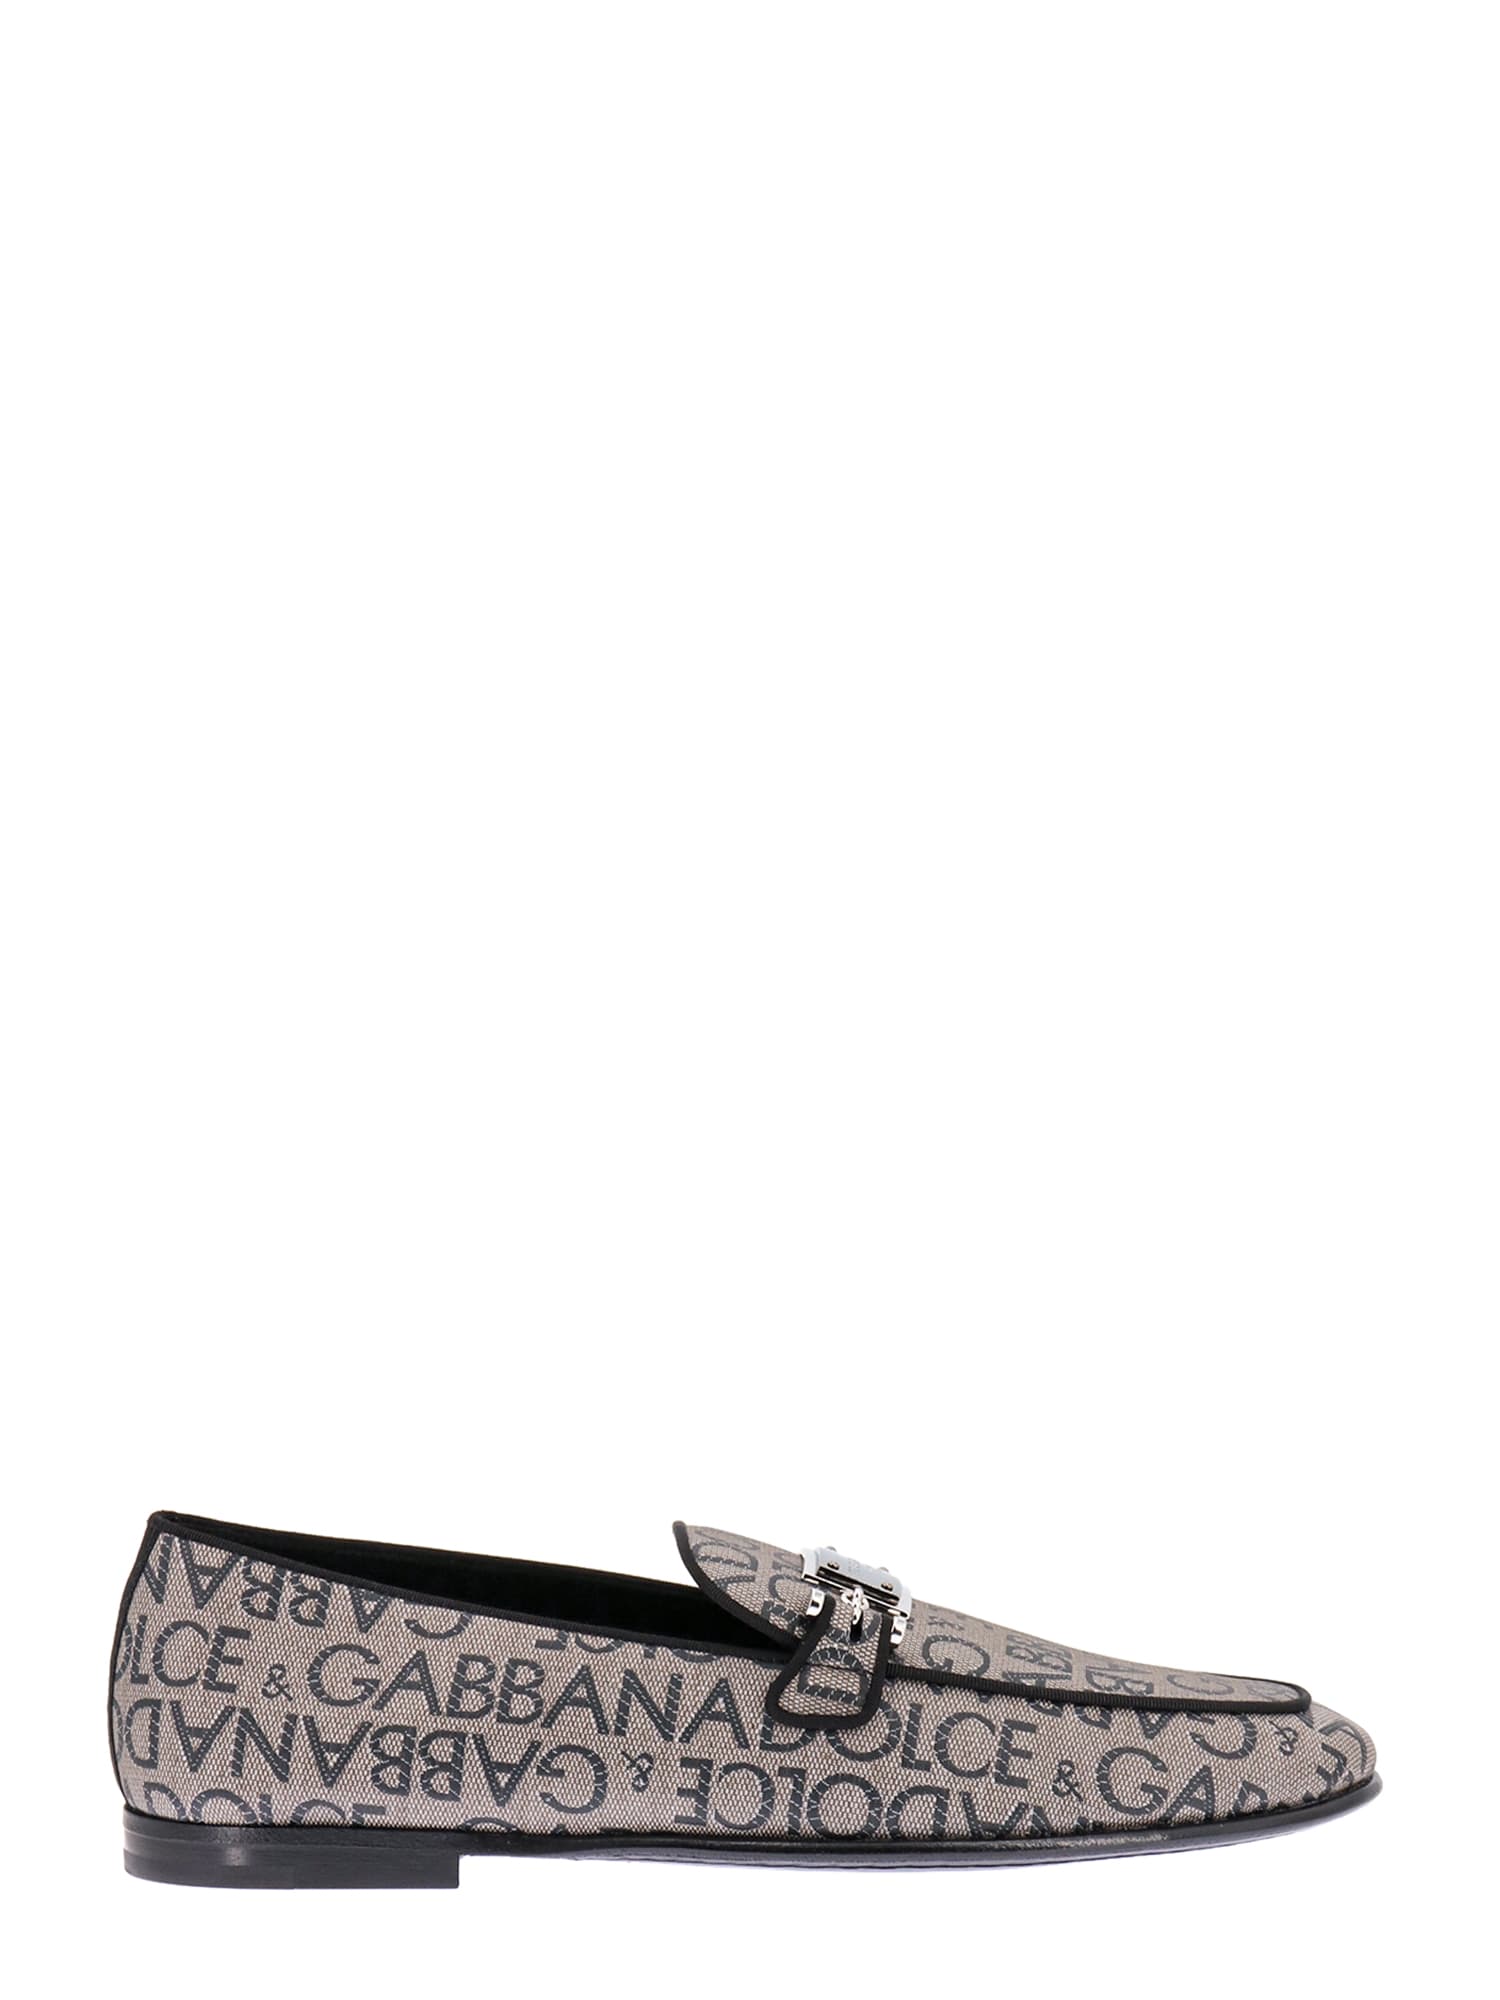 Dolce & Gabbana Loafers In Taupe